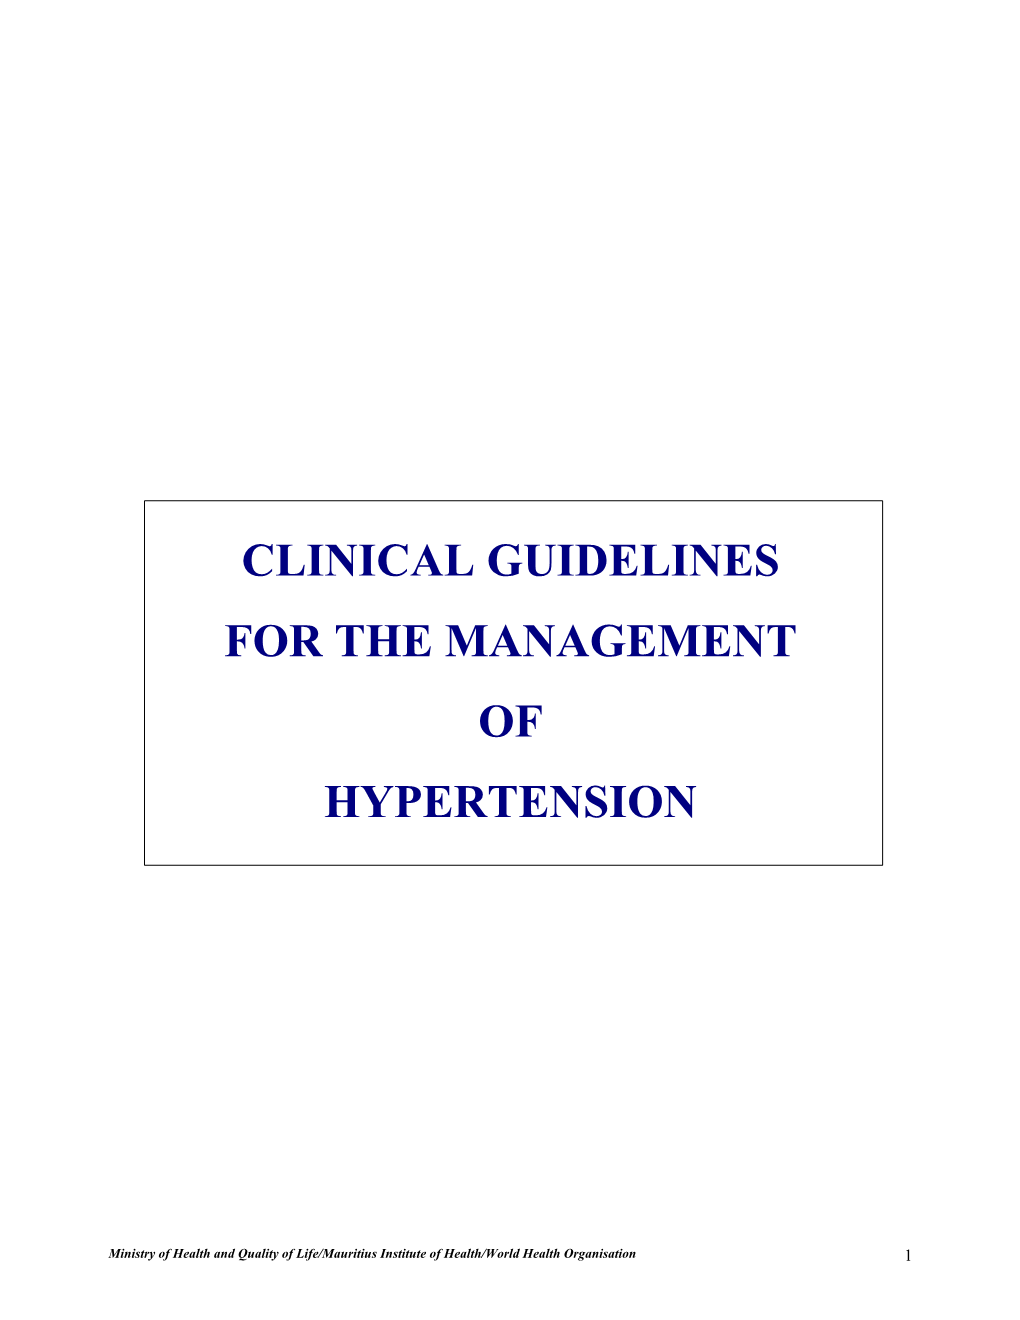 Clinical Guidelines for the Management of Hypertension